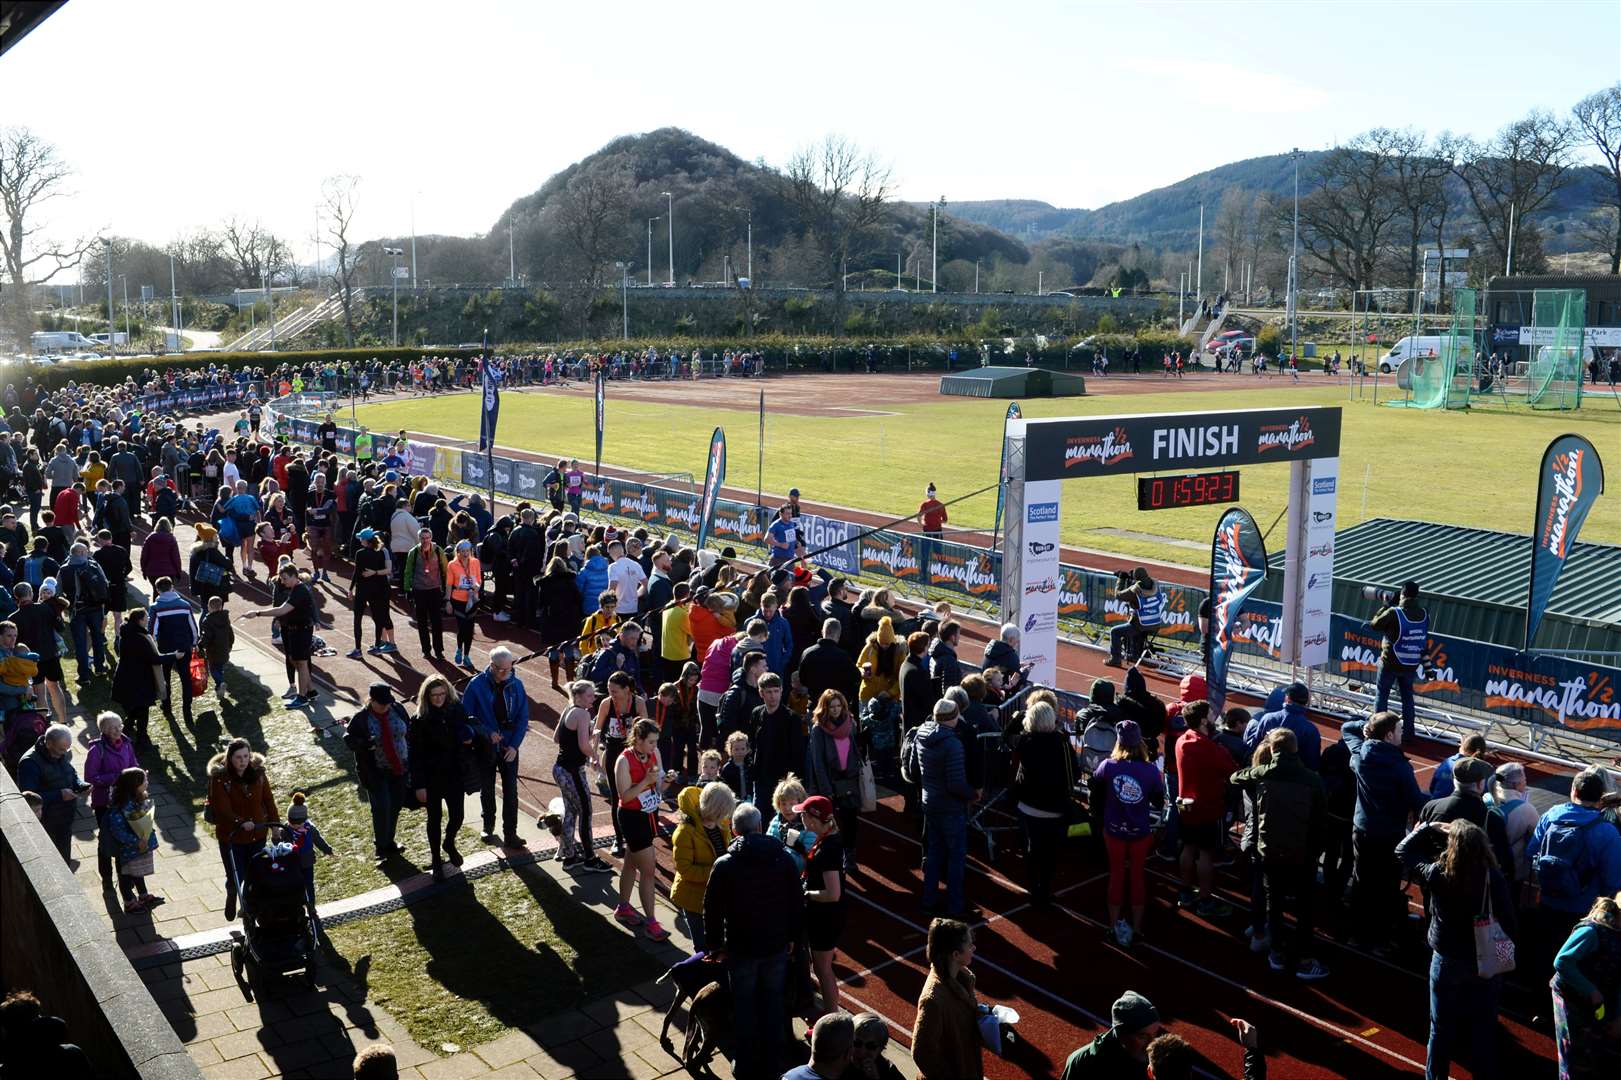 A record number of runners is entering the Inverness Half Marathon this year. Picture: James MacKenzie